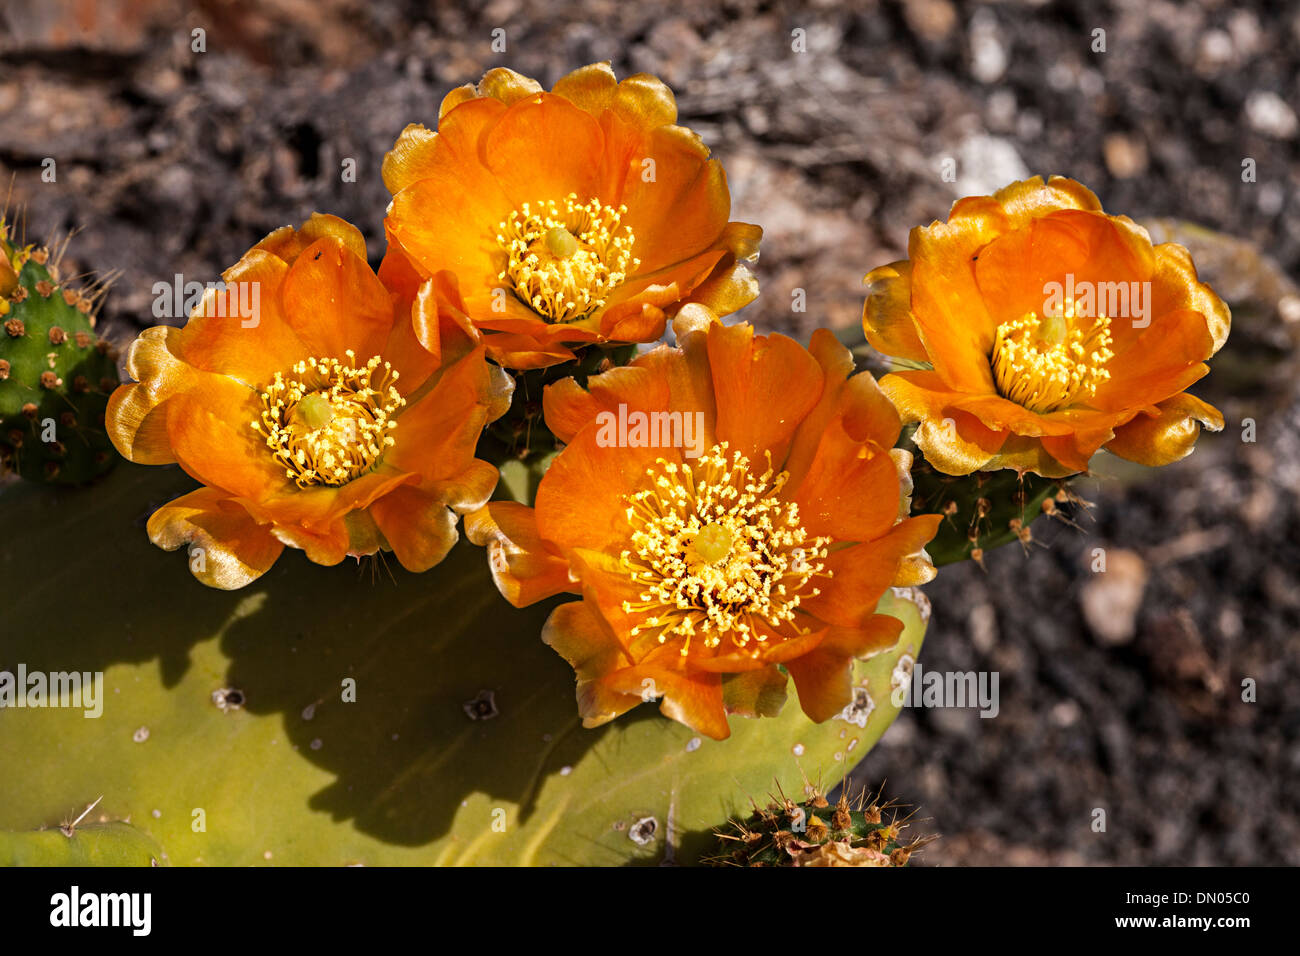 Opuntia prickly pear cactus, farmed on Lanzarote for cochineal beetles, Canary Islands, Spain Stock Photo